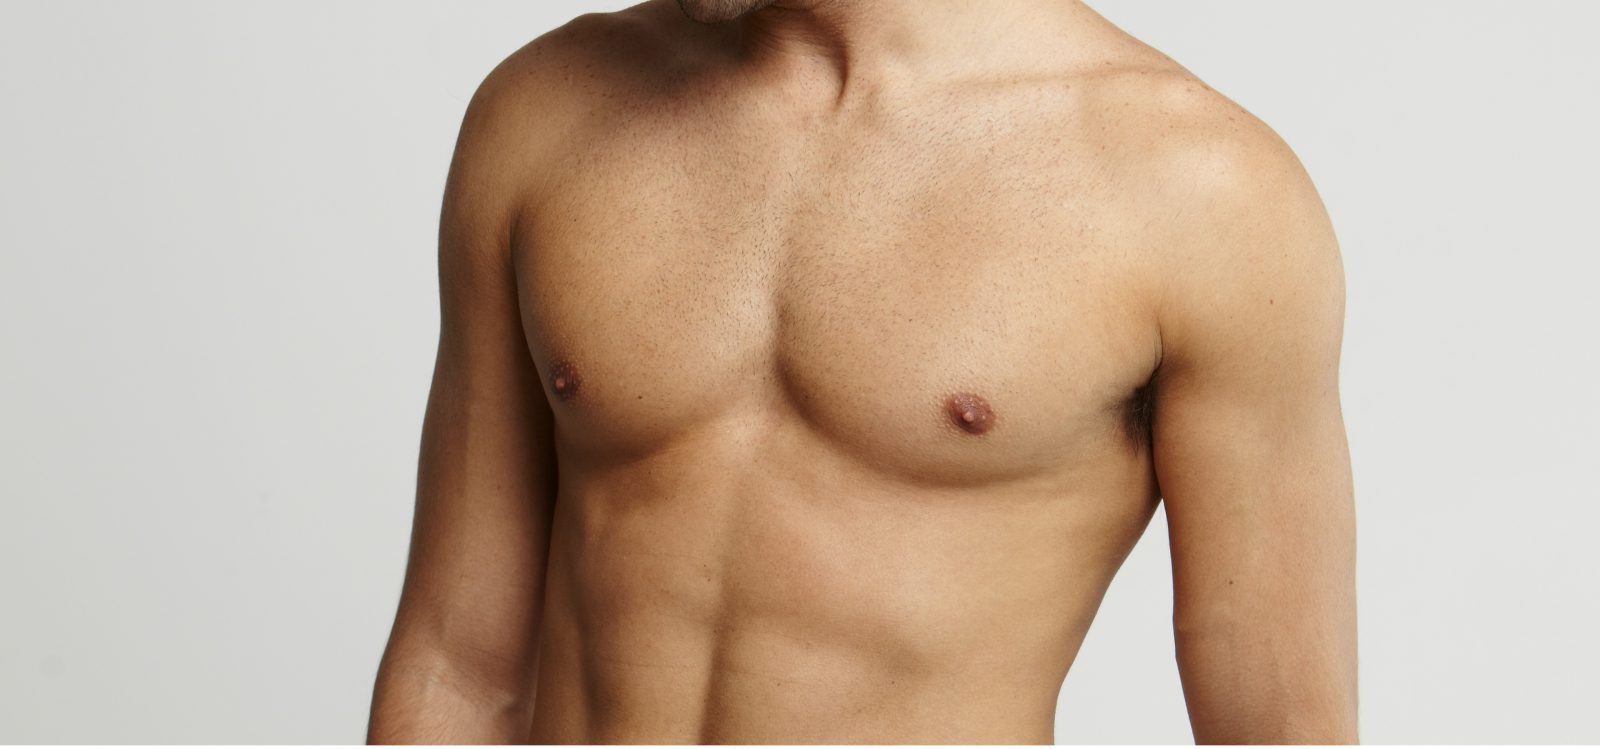 Tampa Bay male breast reduction model shirtless